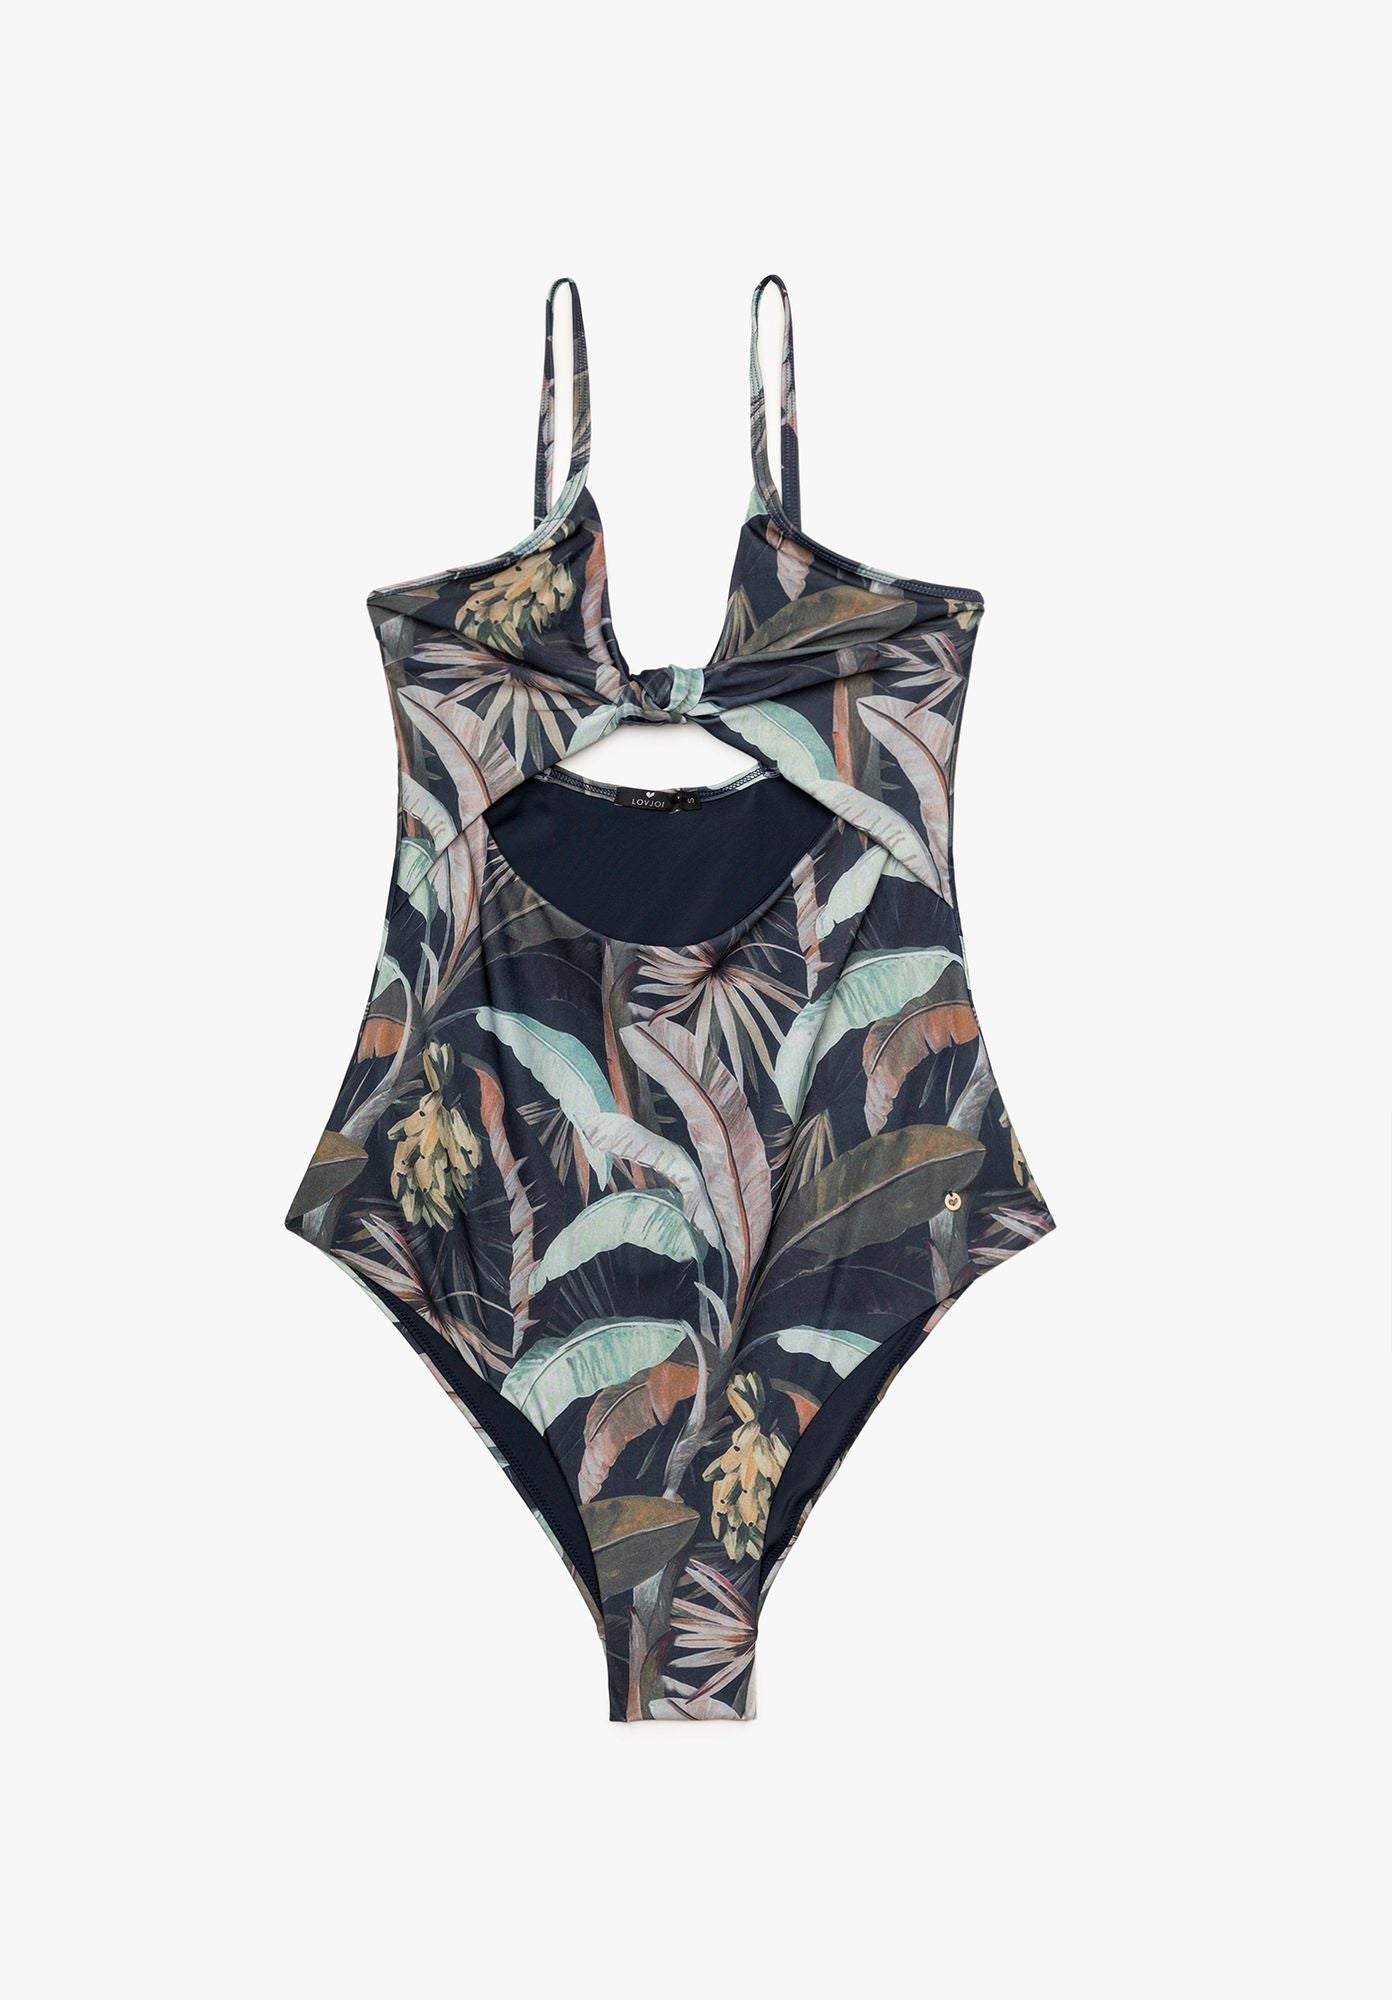 Swimsuit Knotted BELADONA Recycled Print